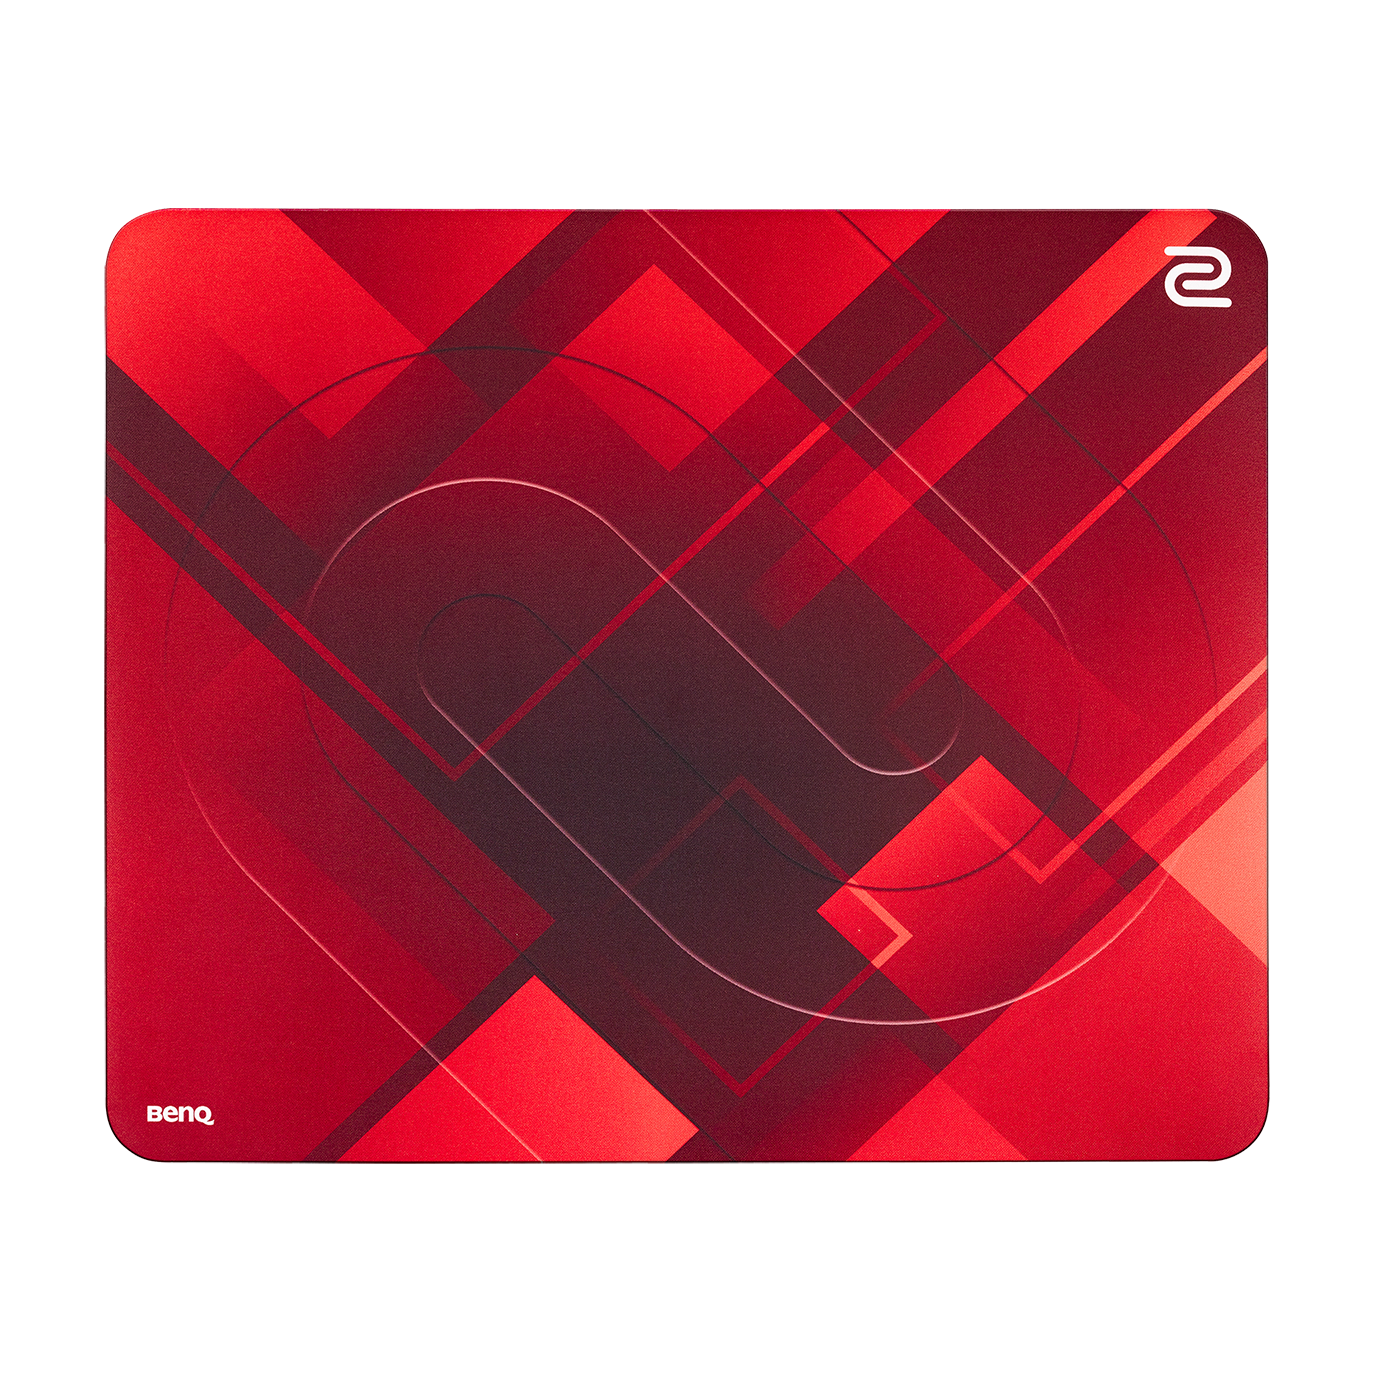 Zowie G Sr Se Divina Version Mouse Pad For E Sports Pink Computer Accessories Peripherals Keyboard Mice Accessories